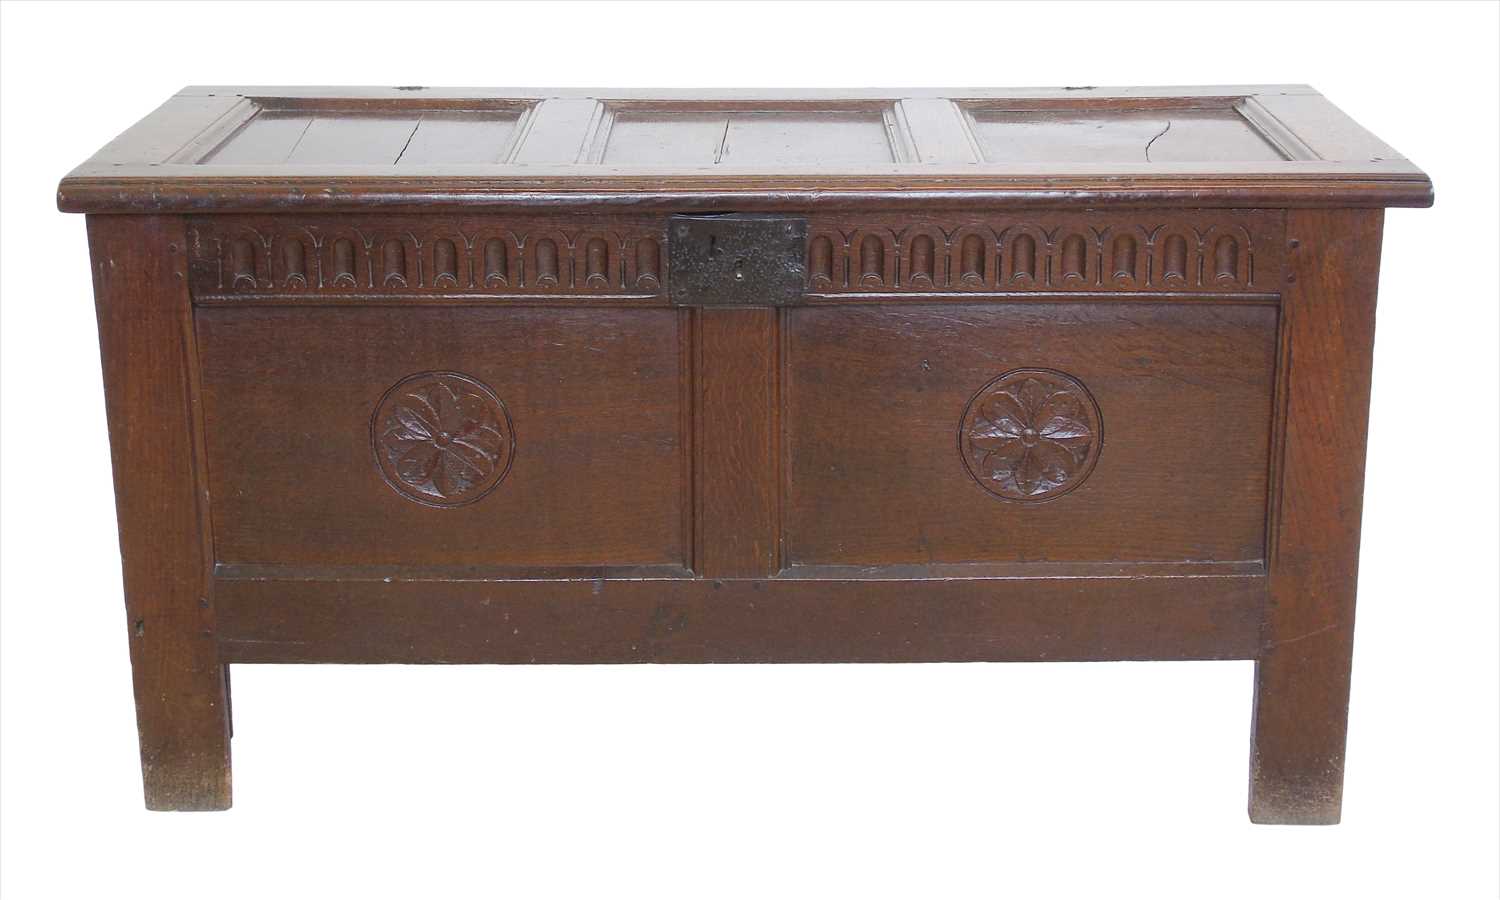 Lot 209 - 17th century oak jointed chest